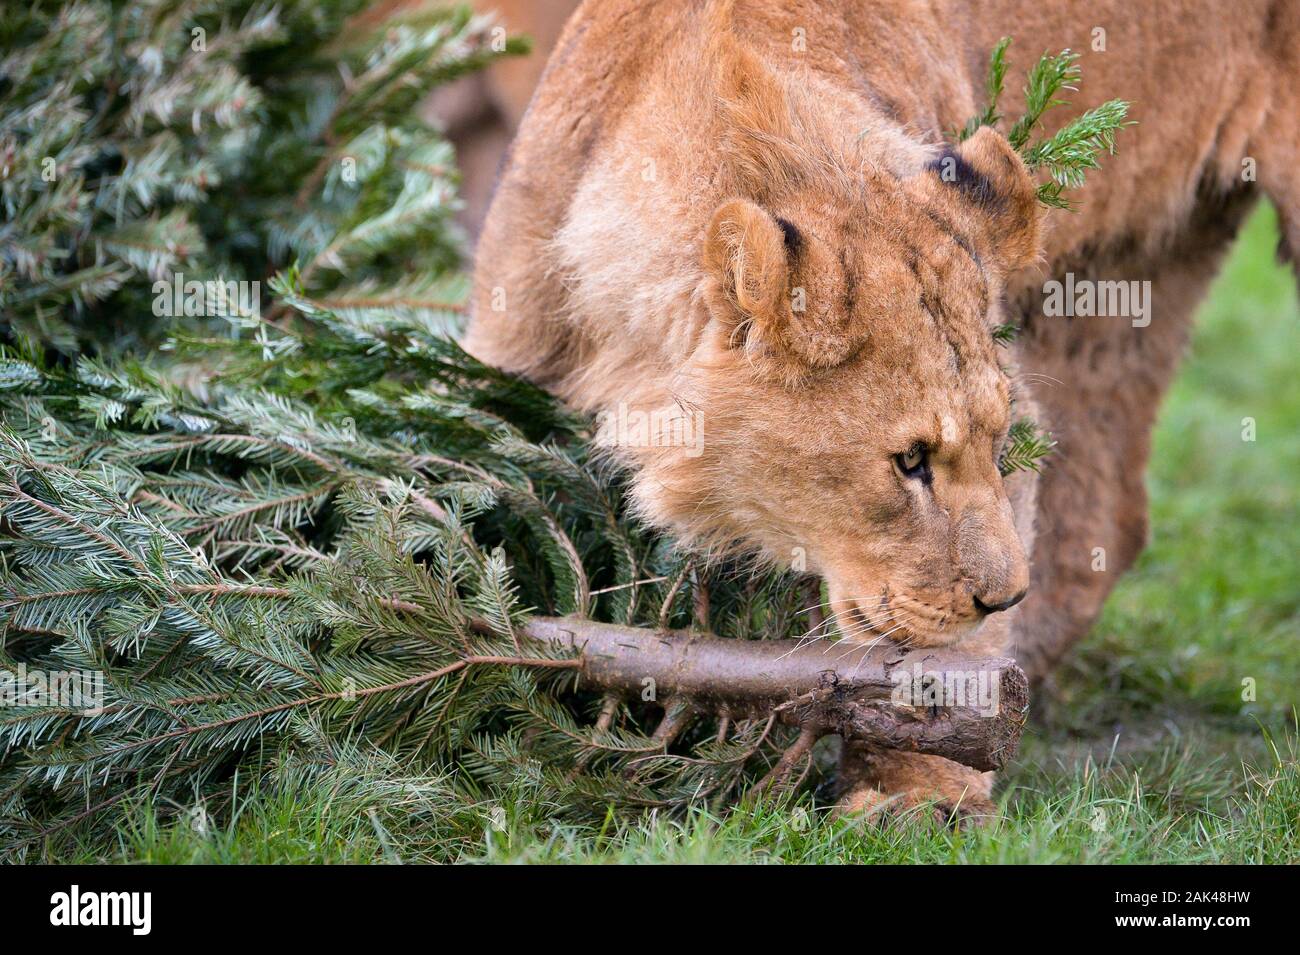 A lion sniffs and nibbles a recycled Christmas tree in the lion enclosure at Noah's Ark Zoo Farm, Wraxall, Somerset, where people are encouraged to donate their old Christmas trees to be used for the zoo animals enrichment and enjoyment. Stock Photo